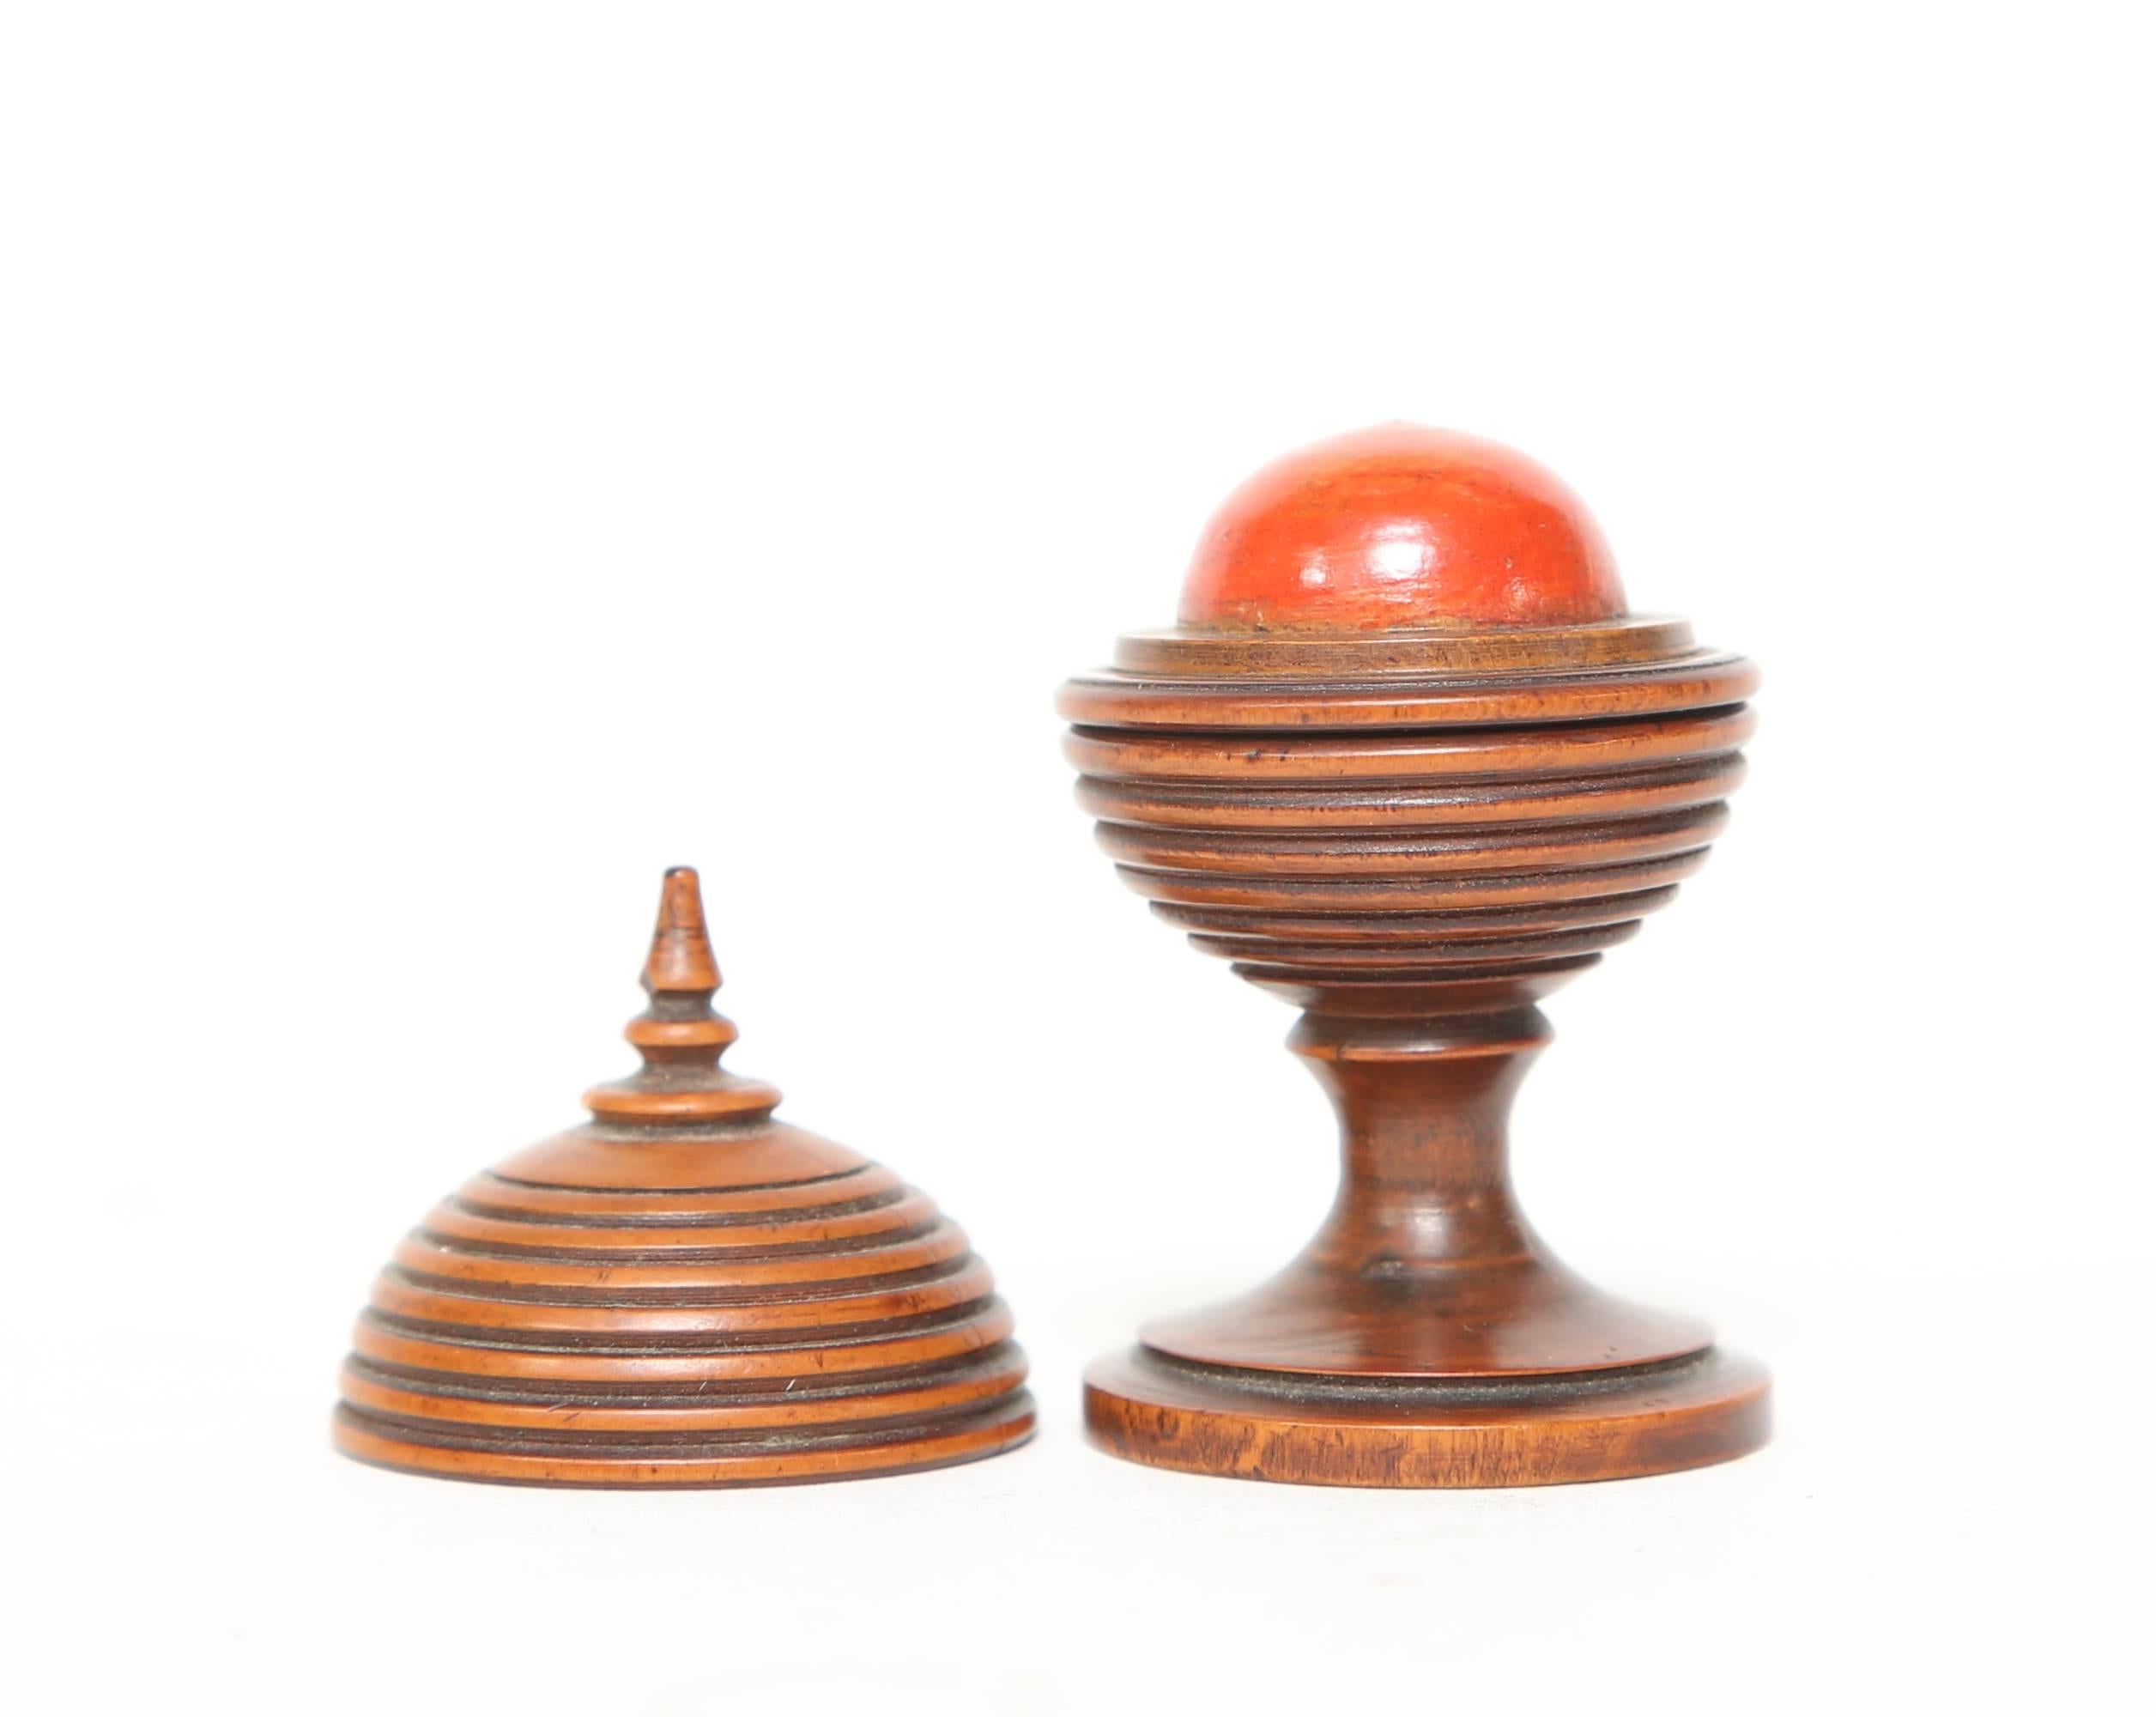 Antique boxwood magic trick with a disappearing red ball. Treen pieces are wooden objects sometimes lathe turned. This piece is beautifully crafted with great patina. After opening the game the first time by applying slight pressure you are able to